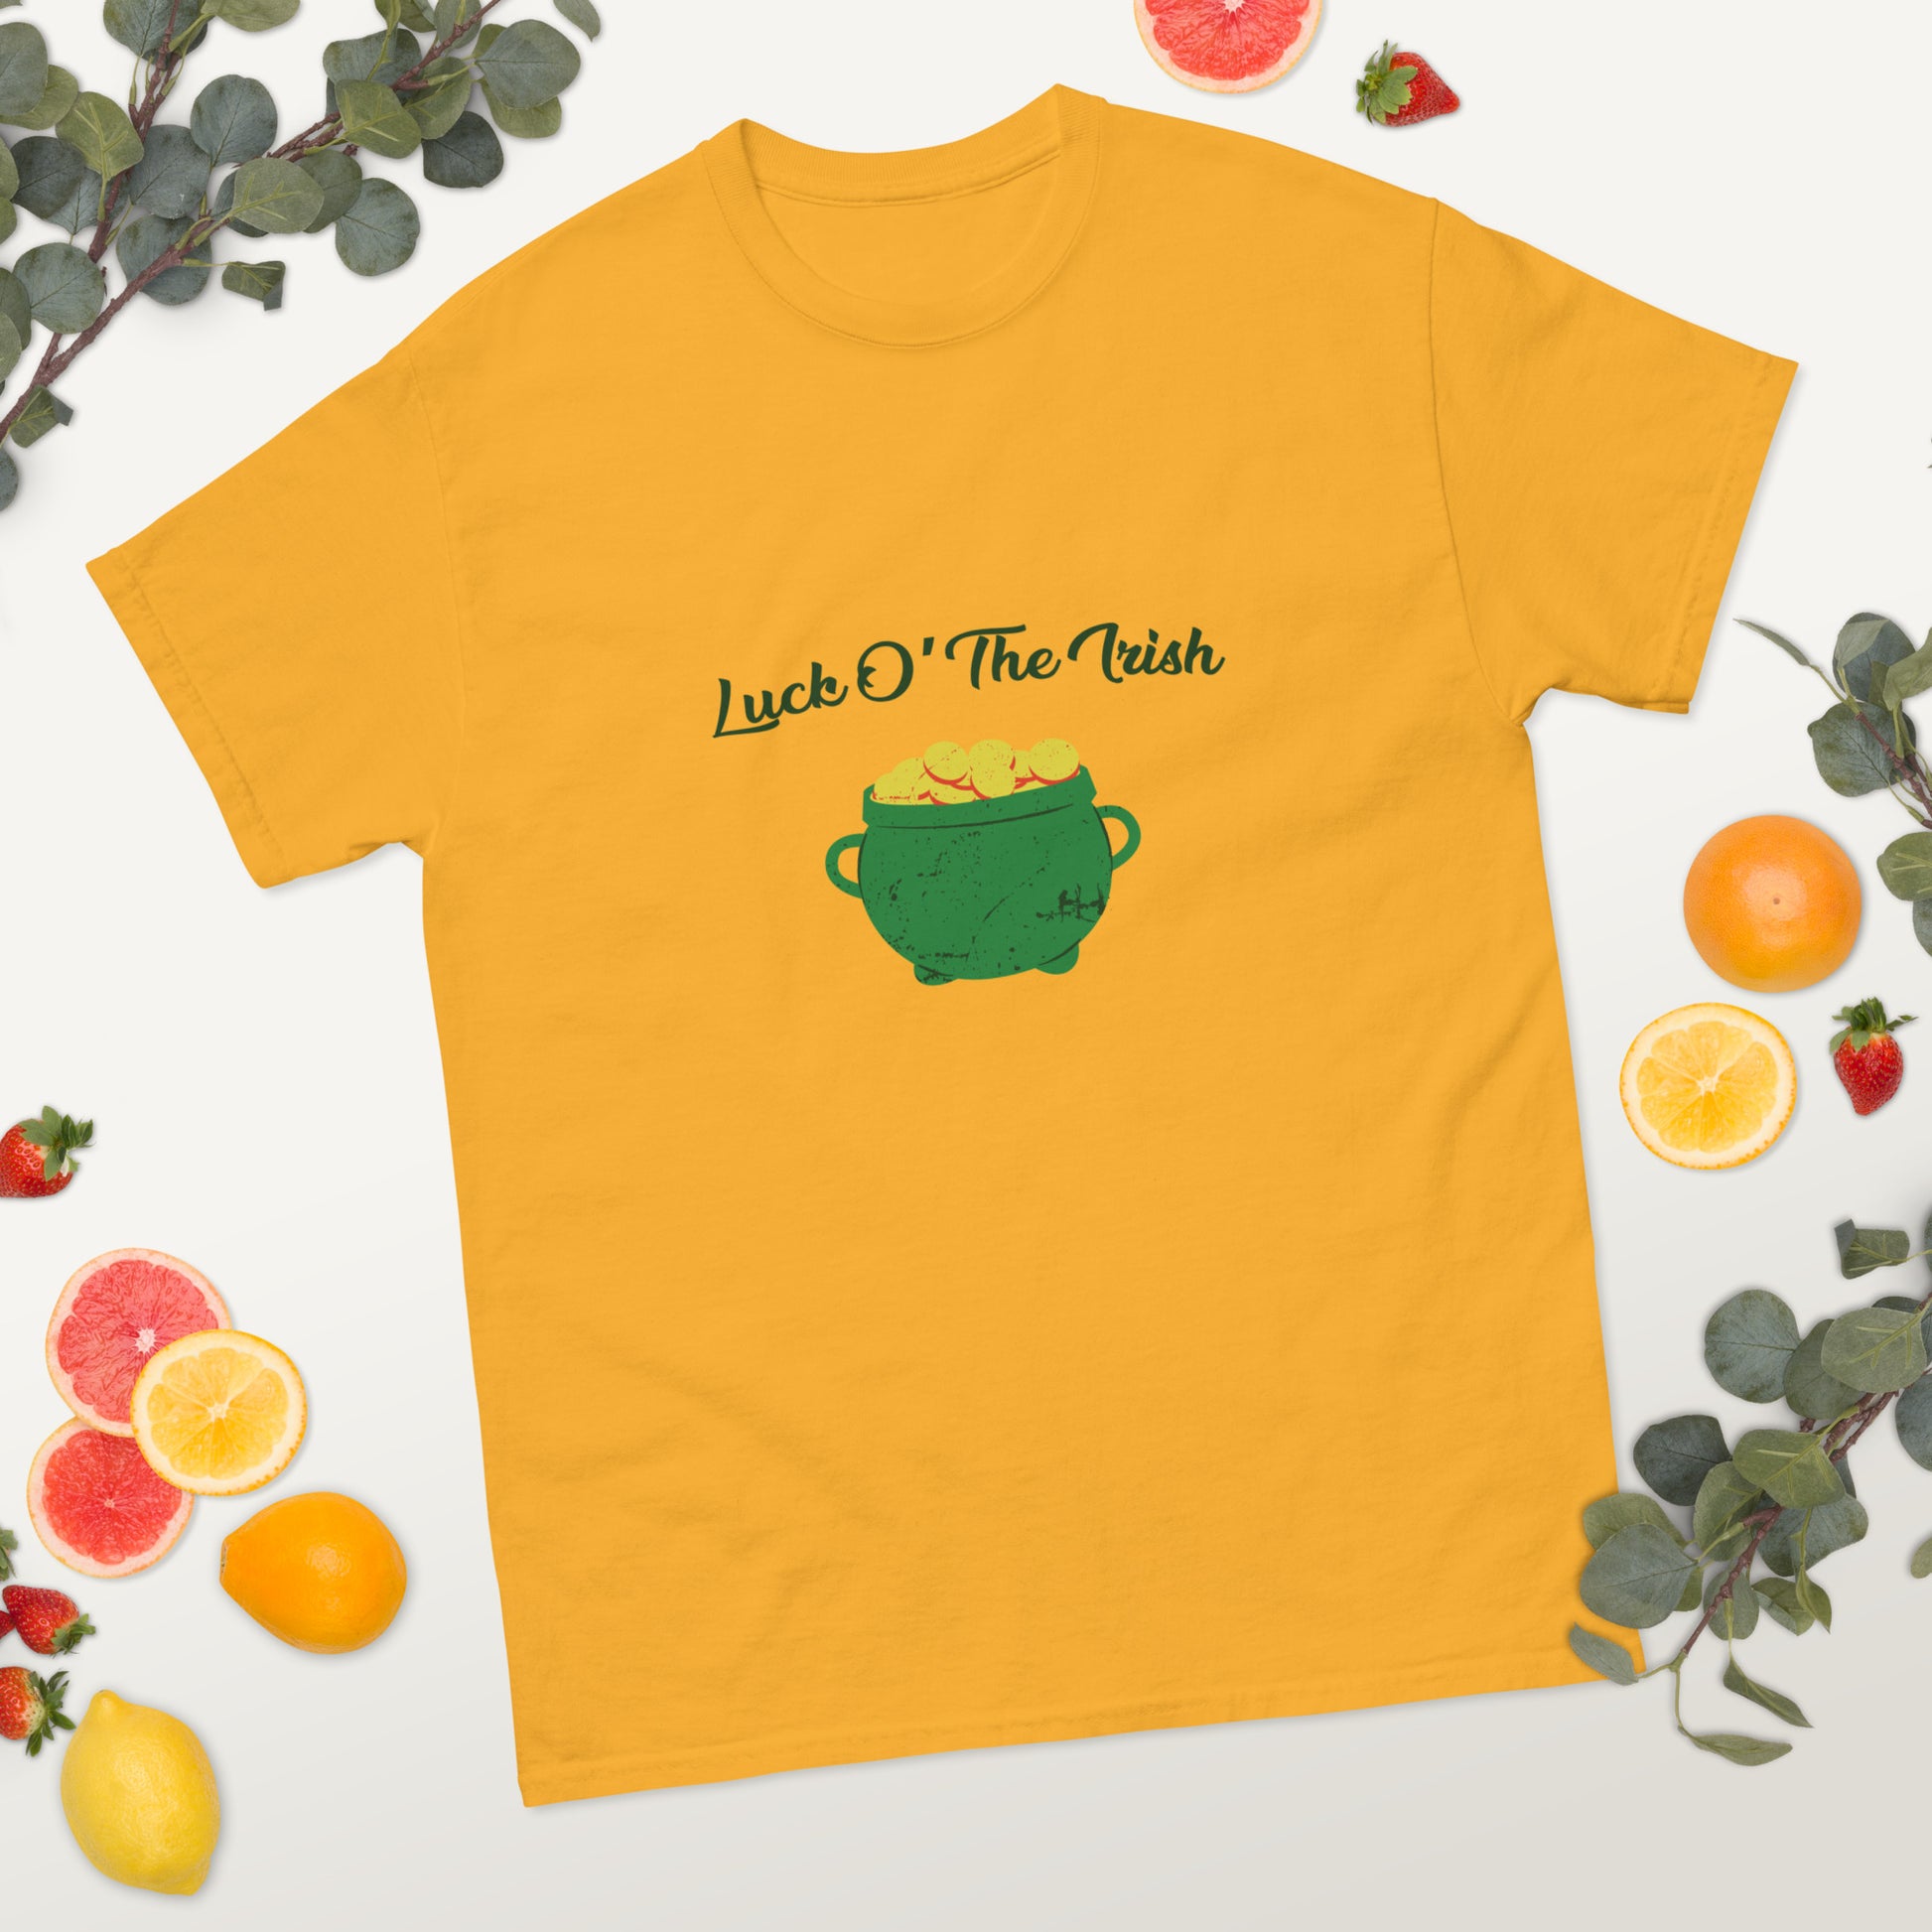 Durable cotton "Luck O’ The Irish" t-shirt with sharp lines